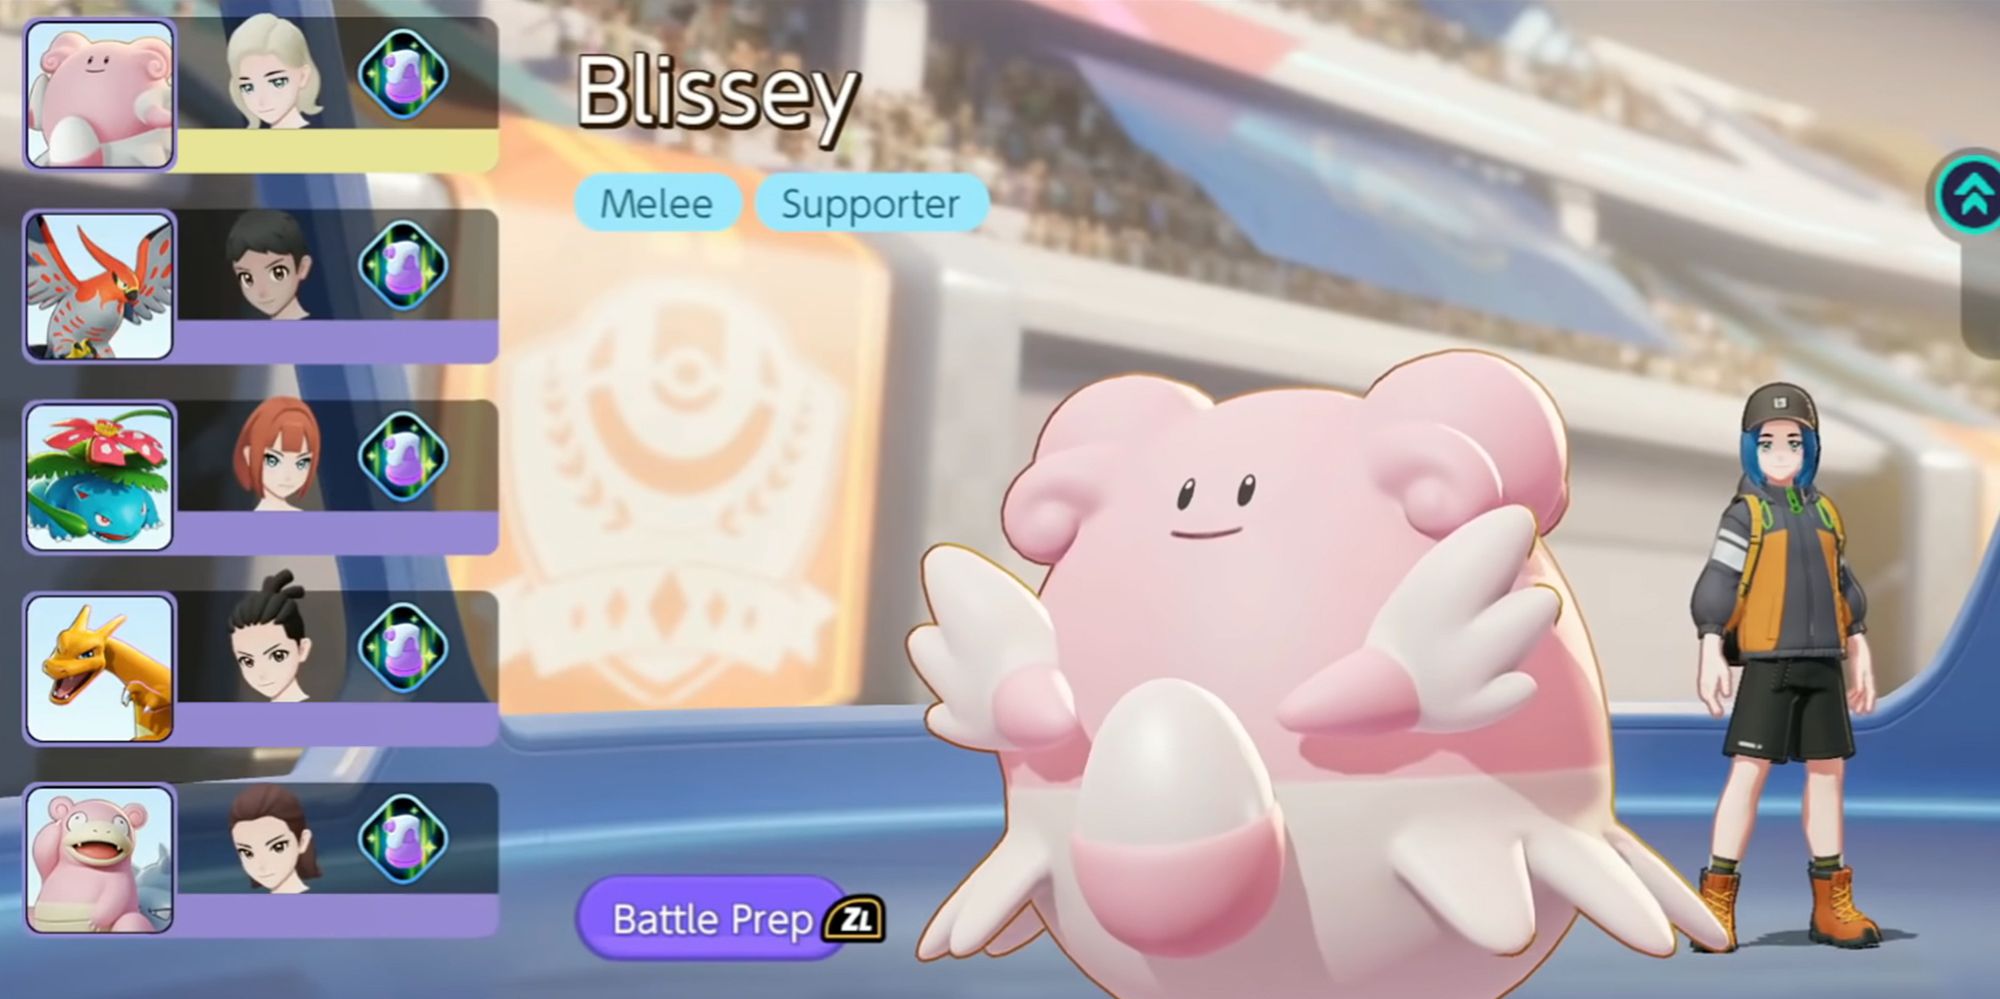 Pokemon Unite -Character Select Screen After Picking Blissey